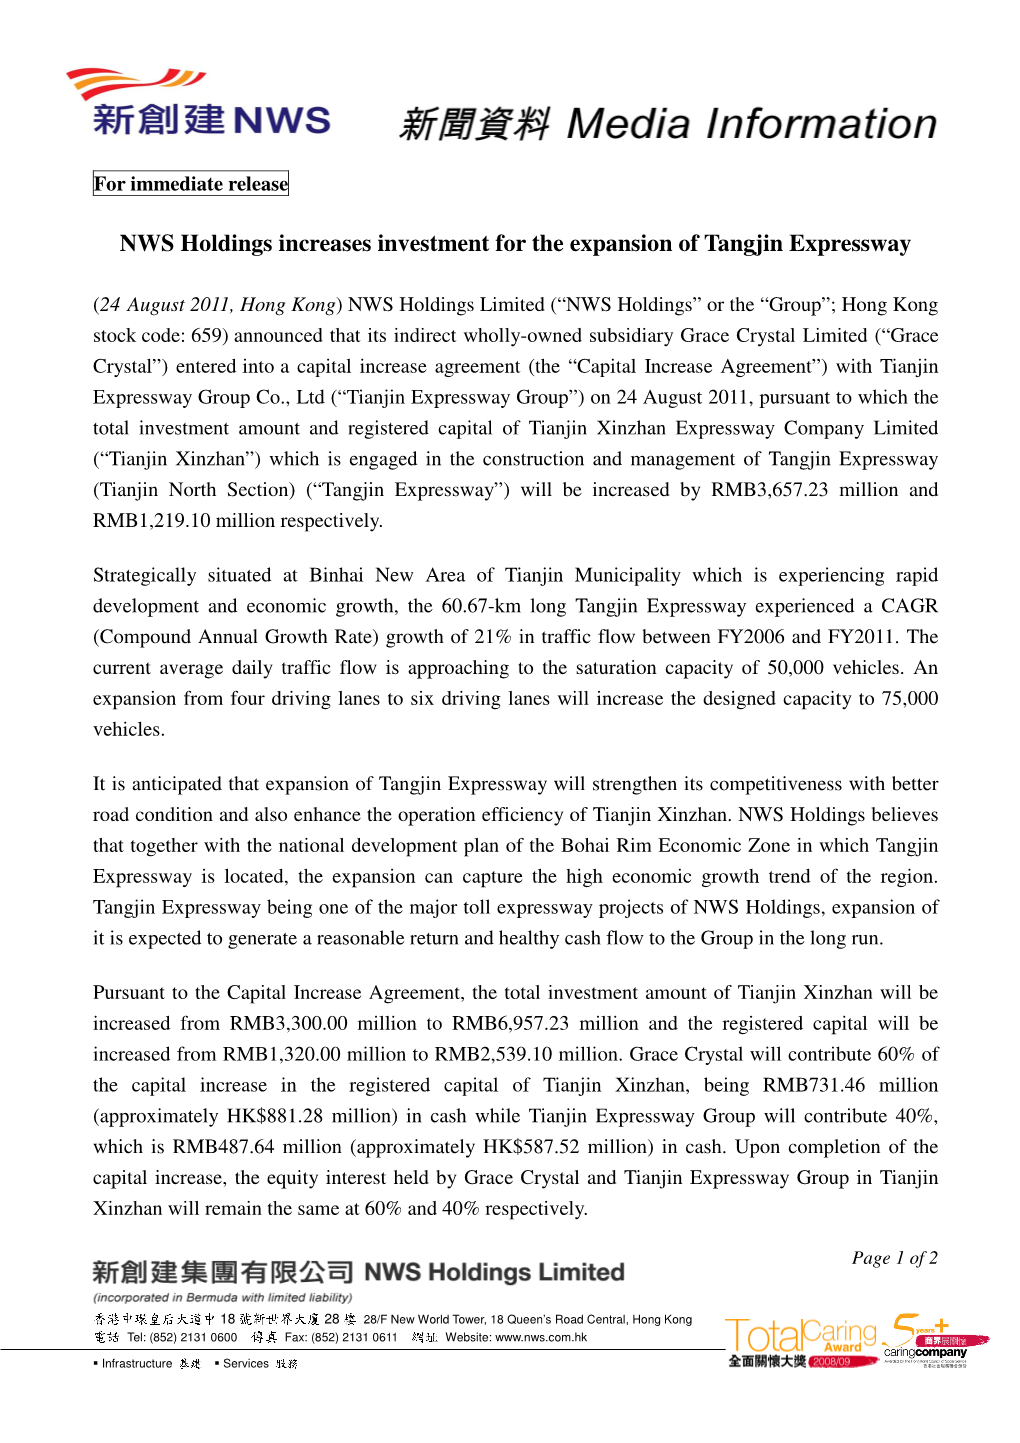 NWS Holdings Increases Investment for the Expansion of Tangjin Expressway